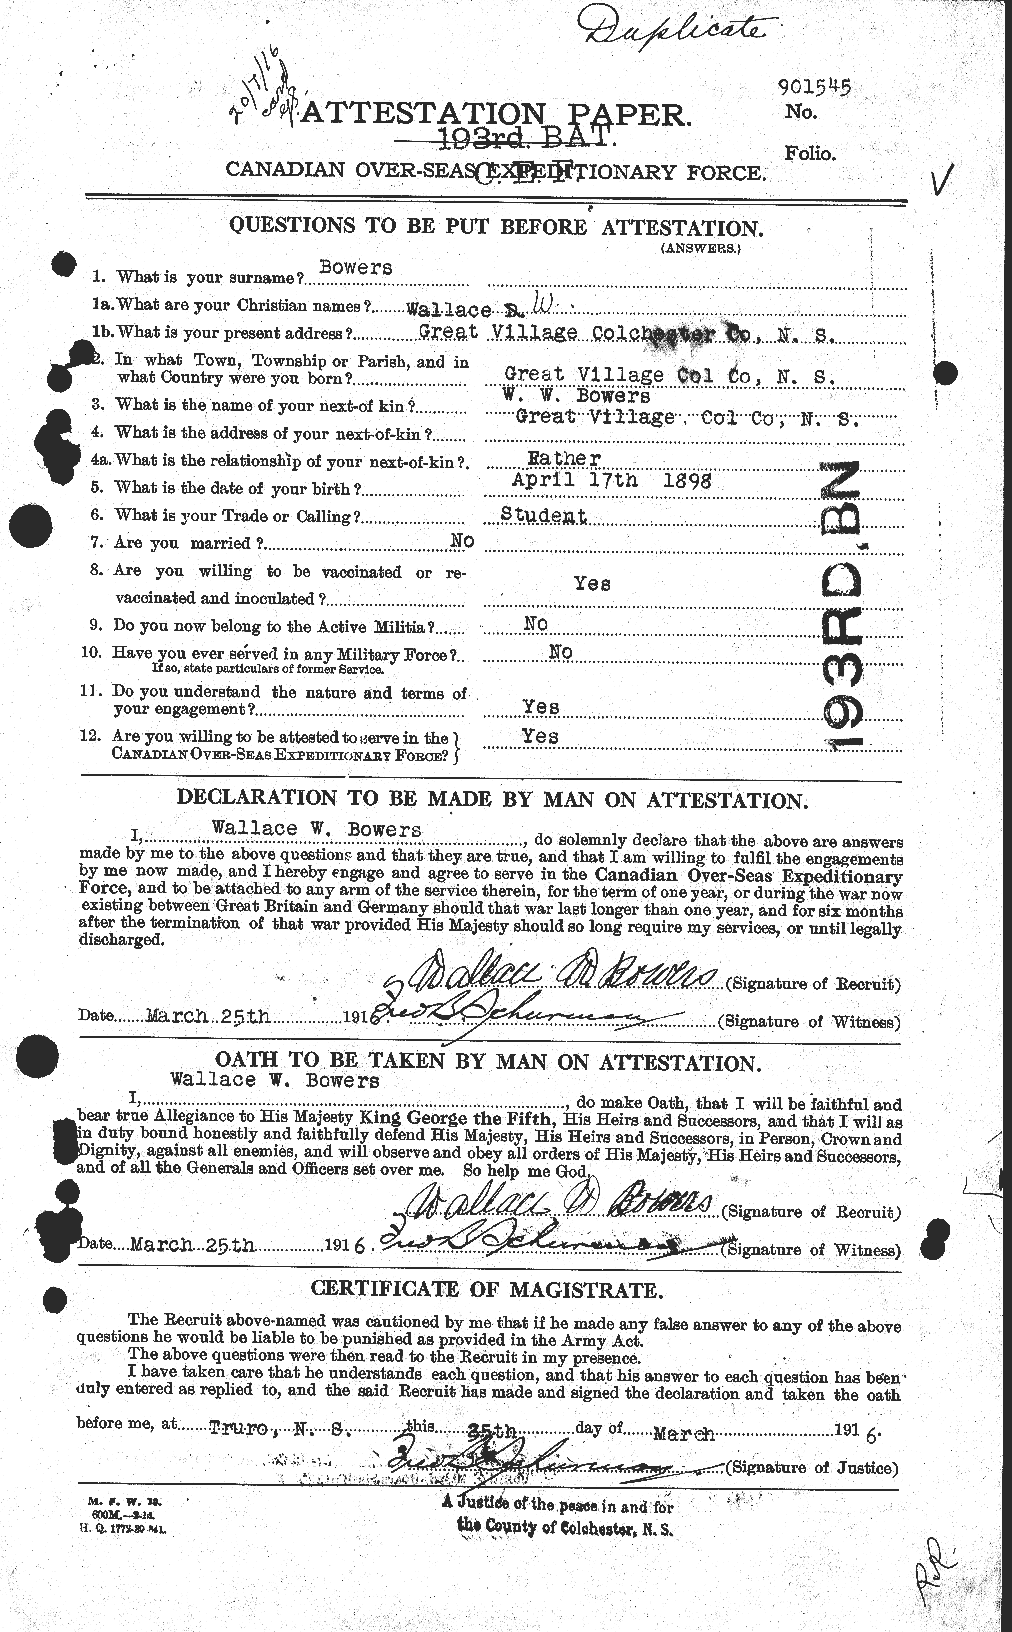 Personnel Records of the First World War - CEF 253582a